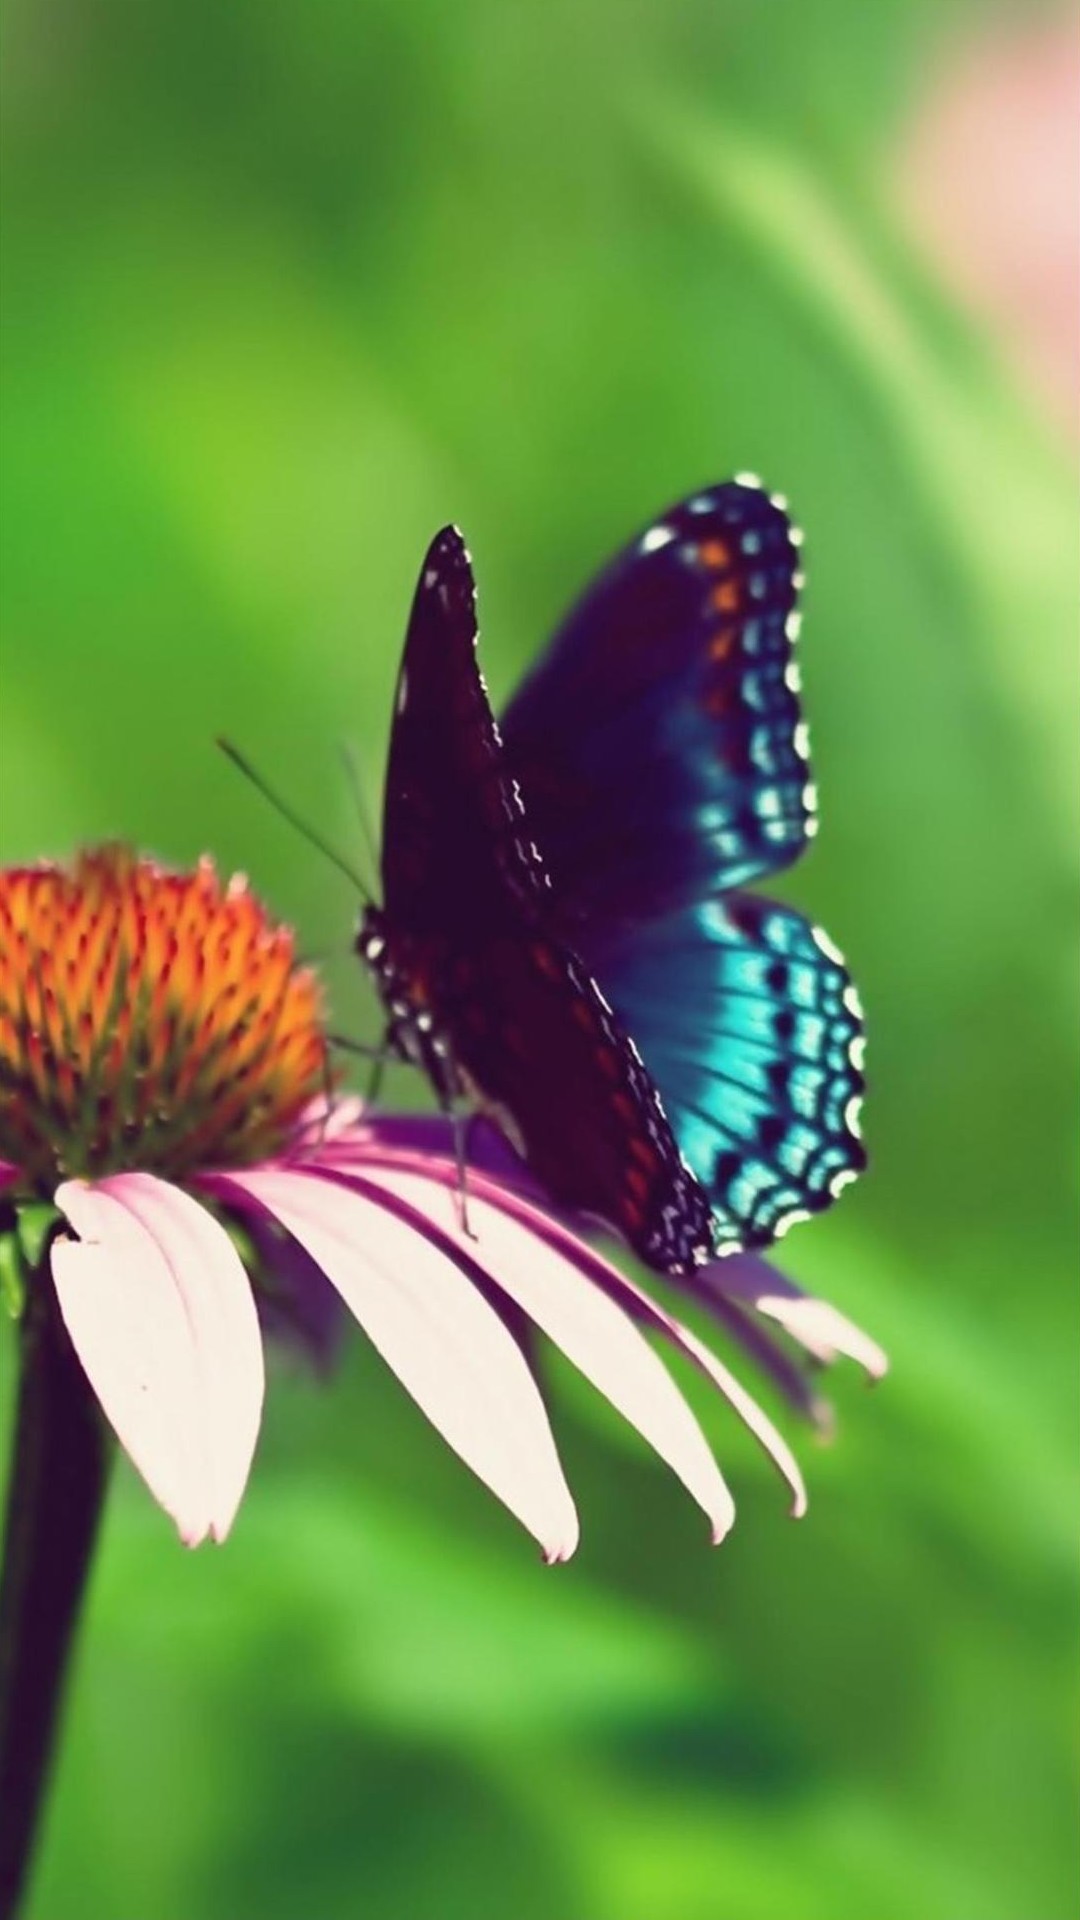 Butterfly Backgrounds For Android - Summer Flowers With Butterflies - HD Wallpaper 